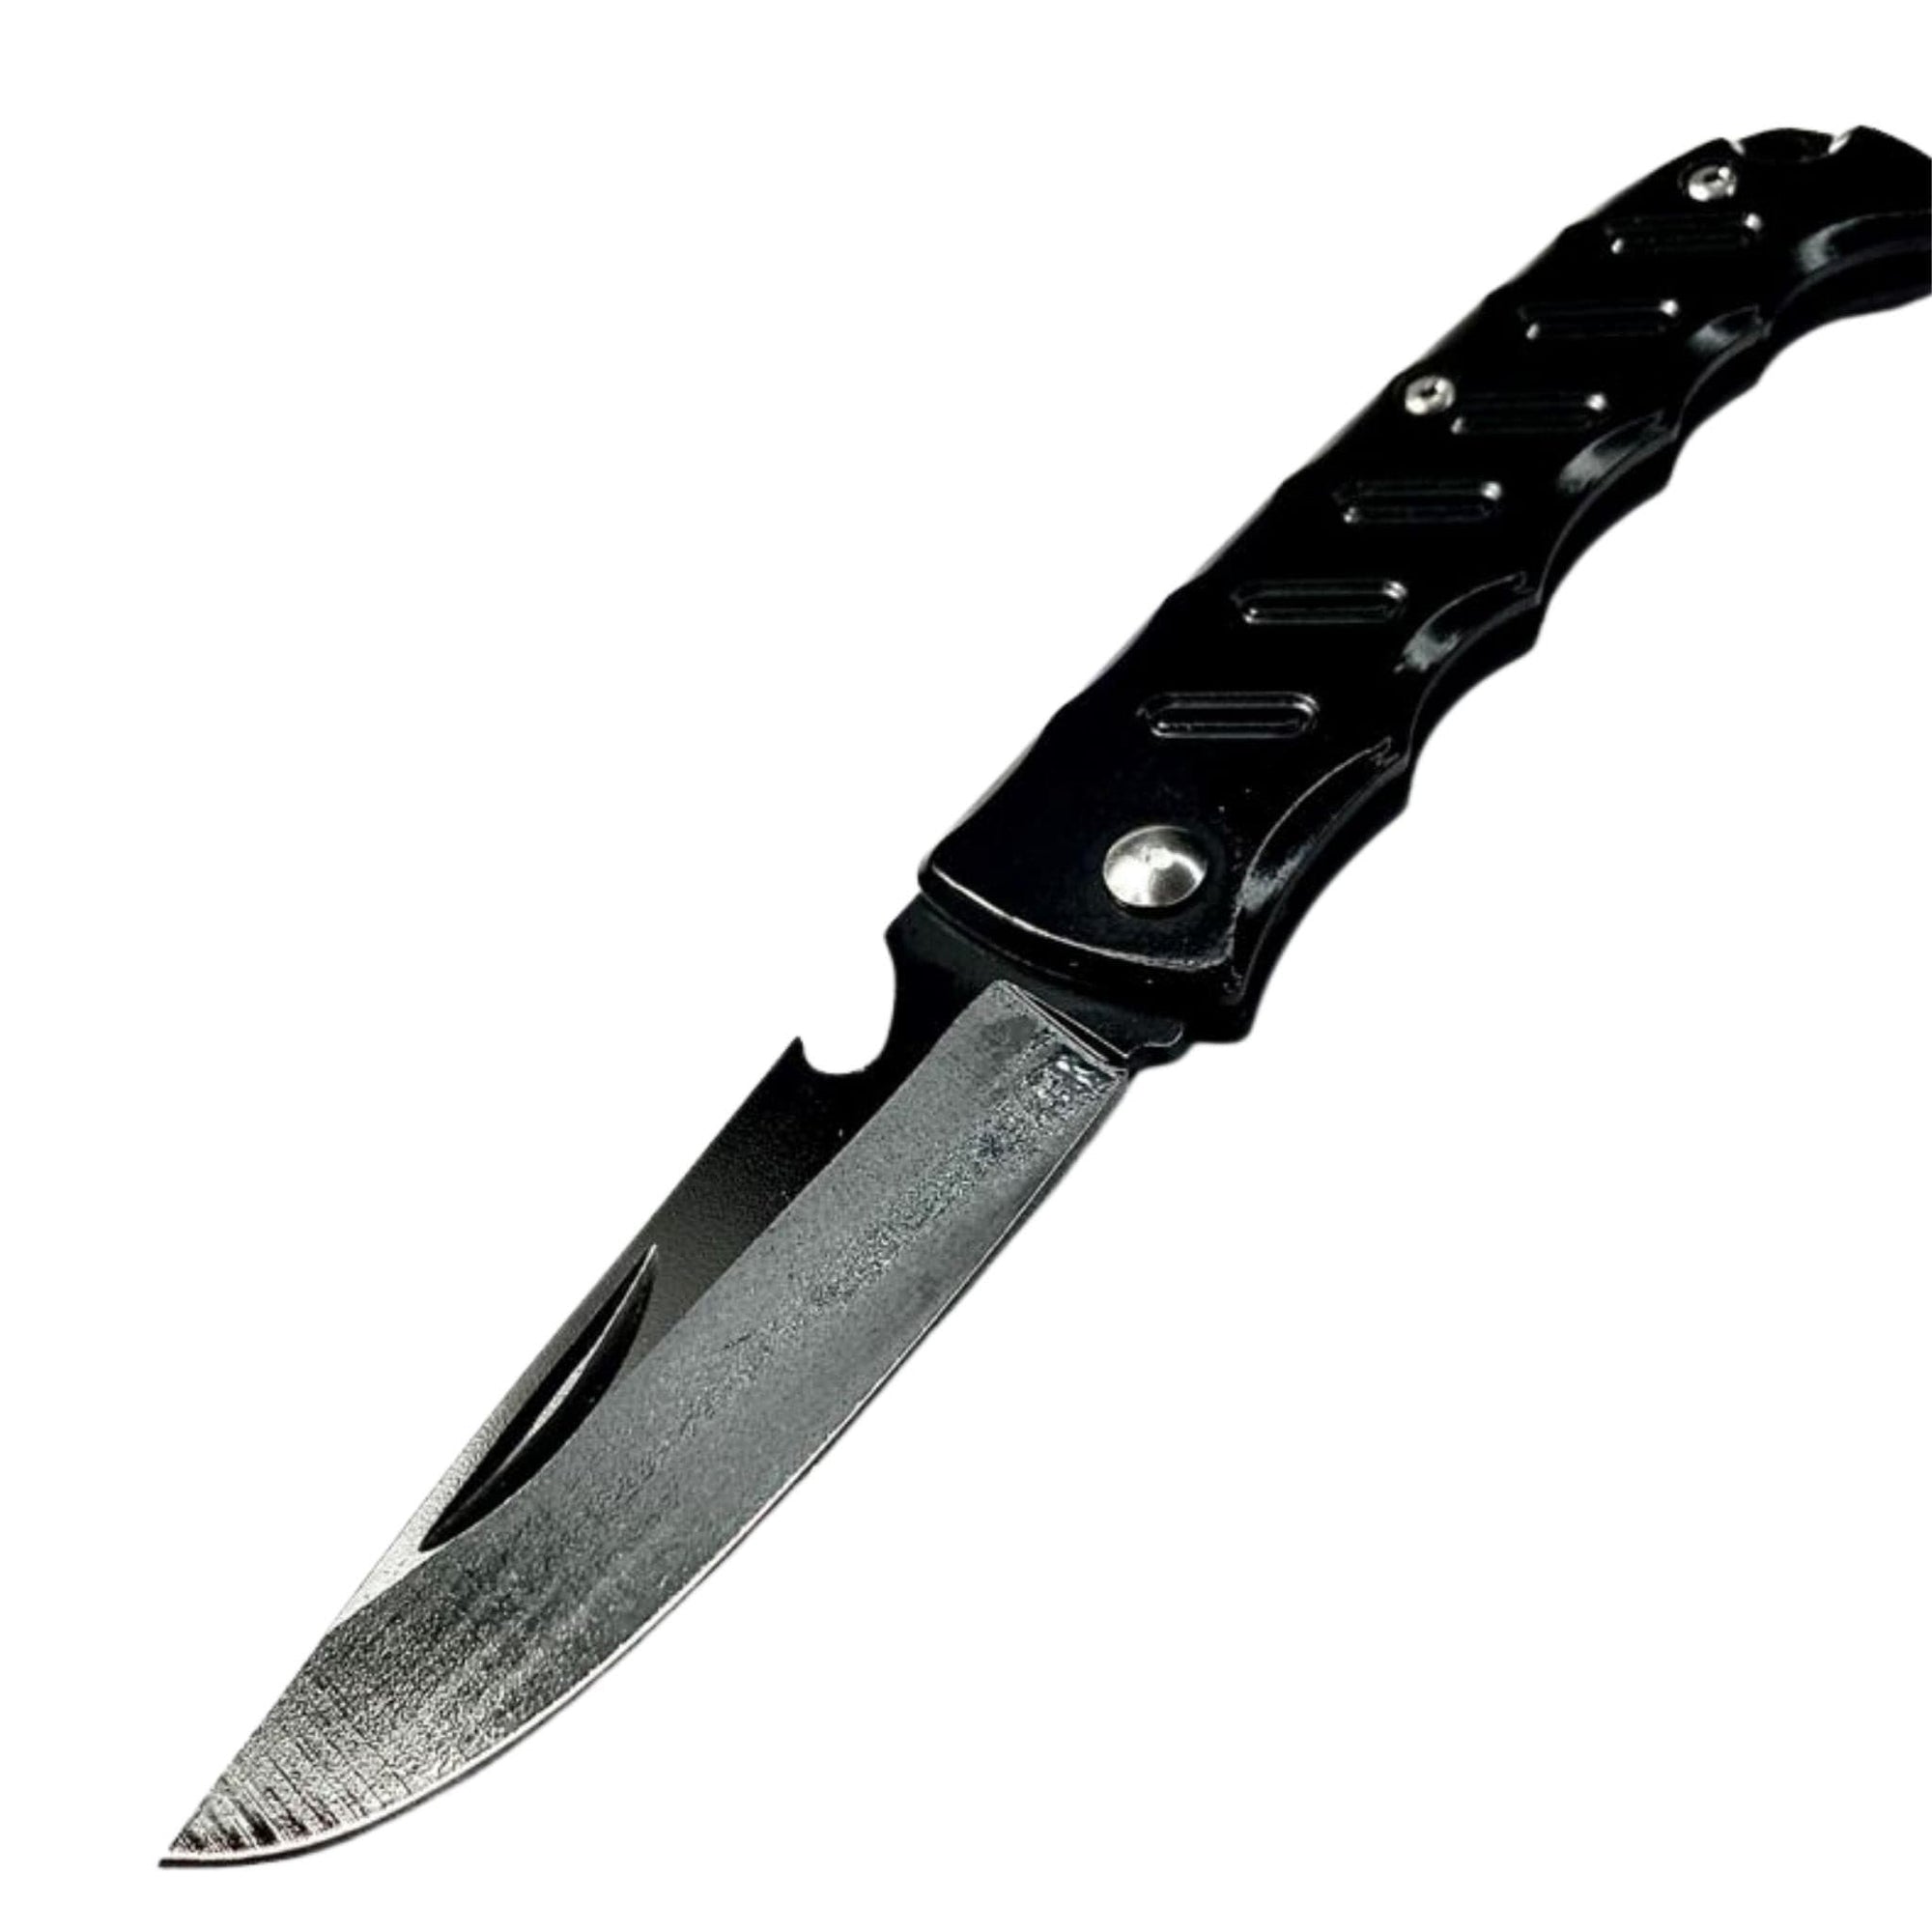 Pocket knife - South East Clearance Centre